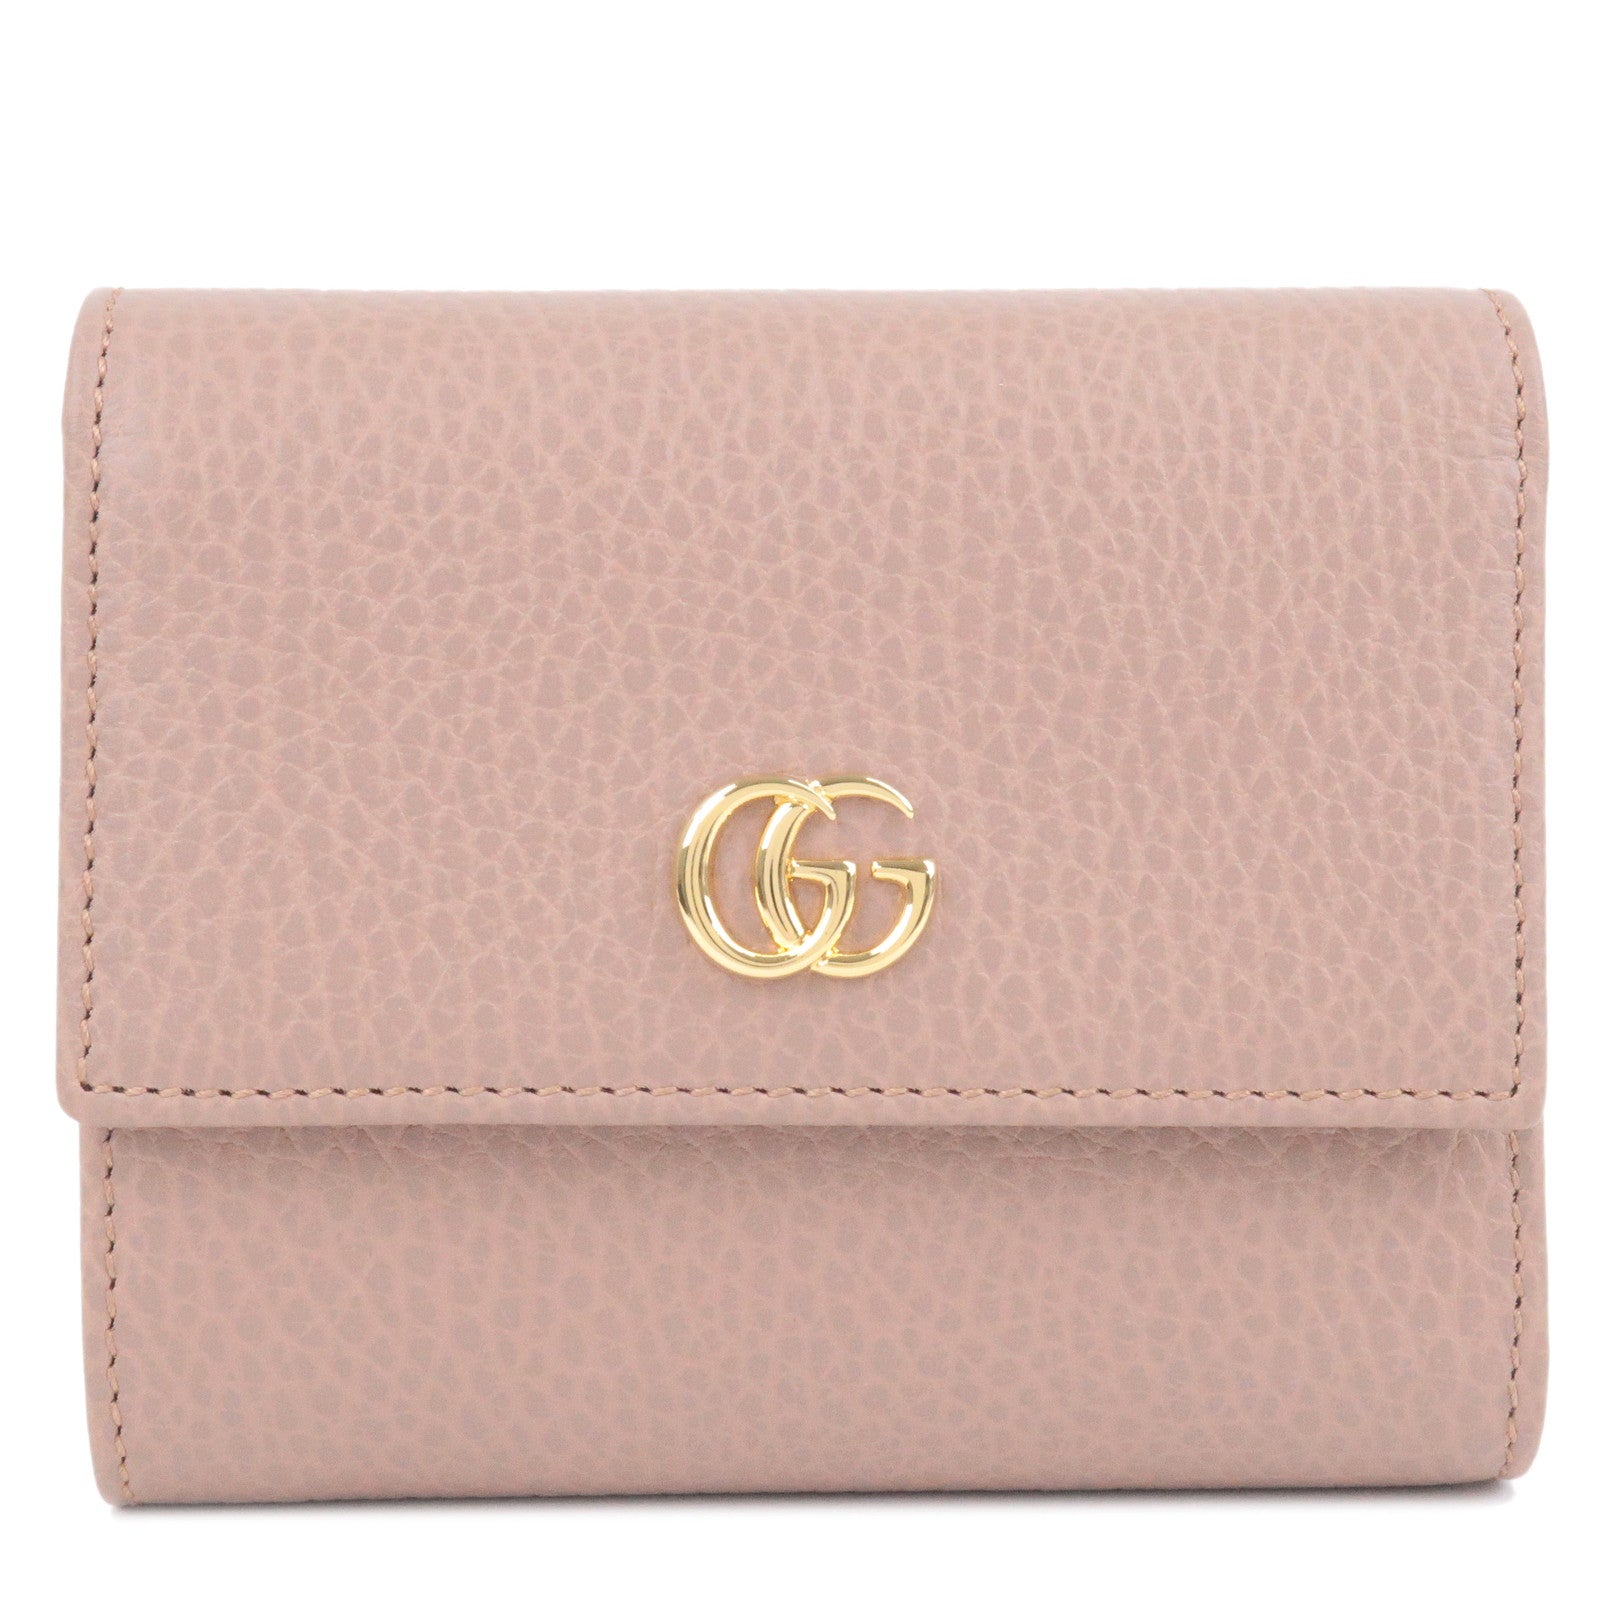 GUCCI-GG-Marmont-Leather-Trifold-Wallet-Pink-Beige-546584